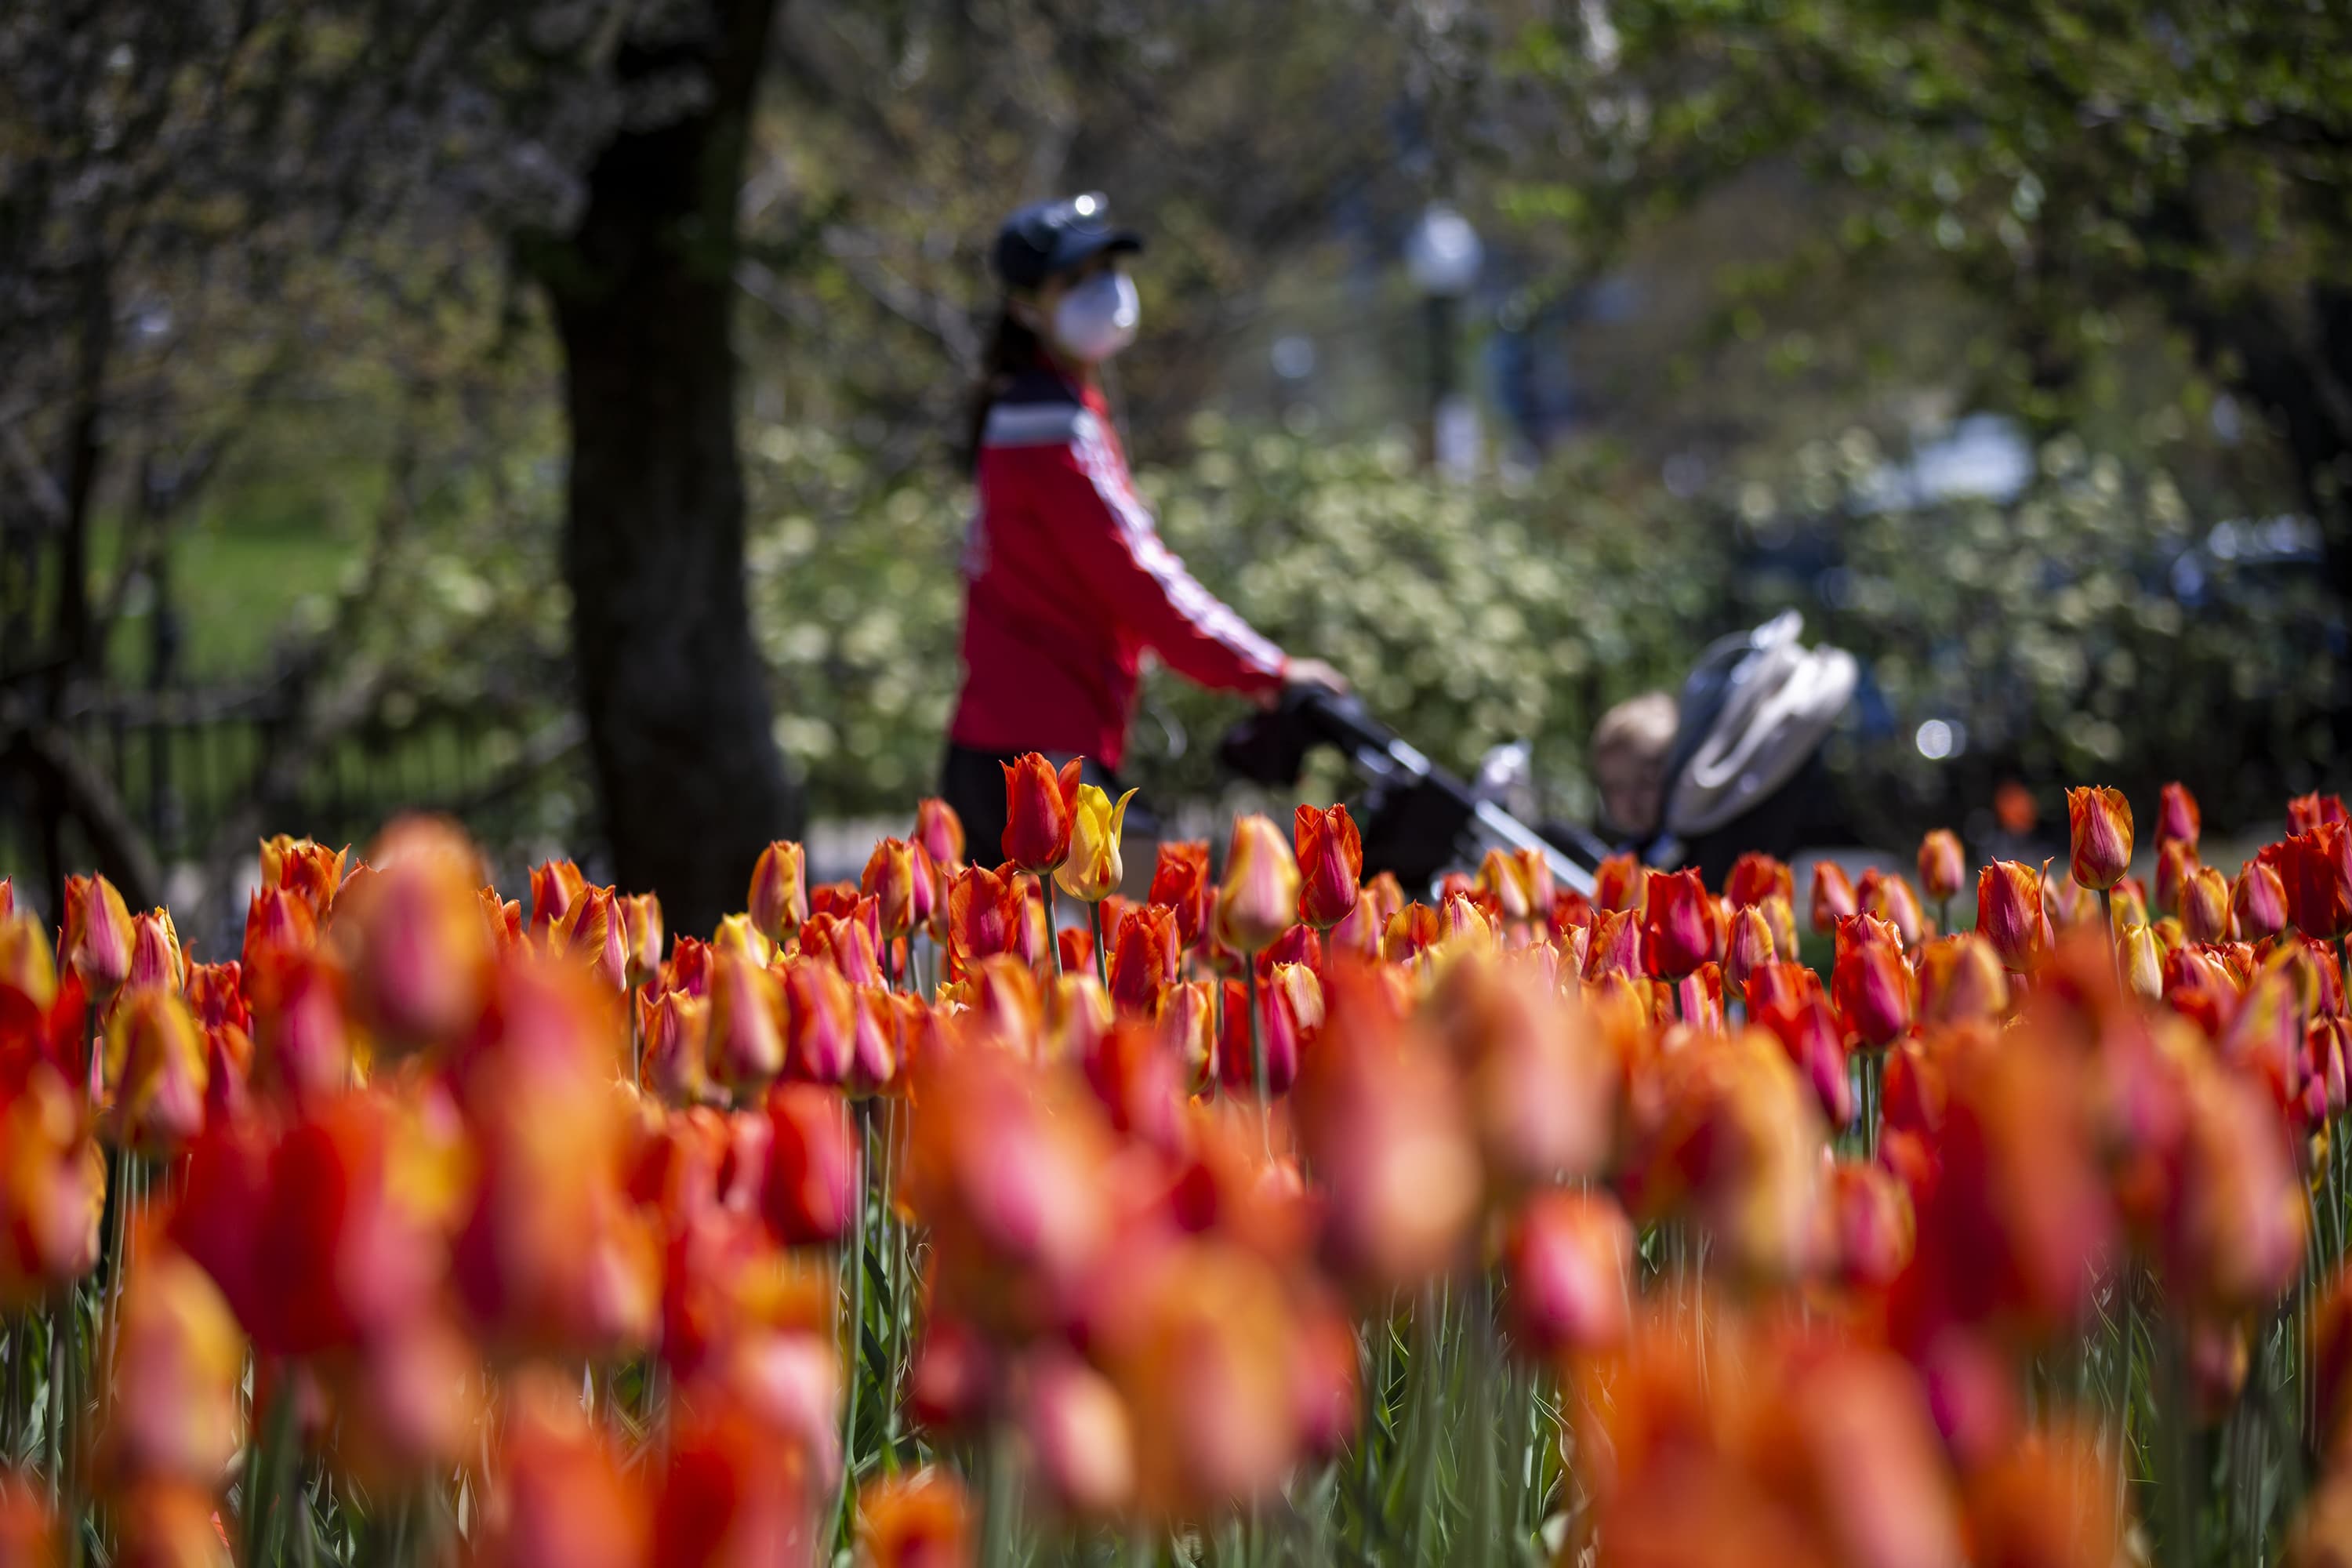 A woman with a baby carriage walks past the tulips in bloom at the Boston Public Garden. (Jesse Costa/WBUR)